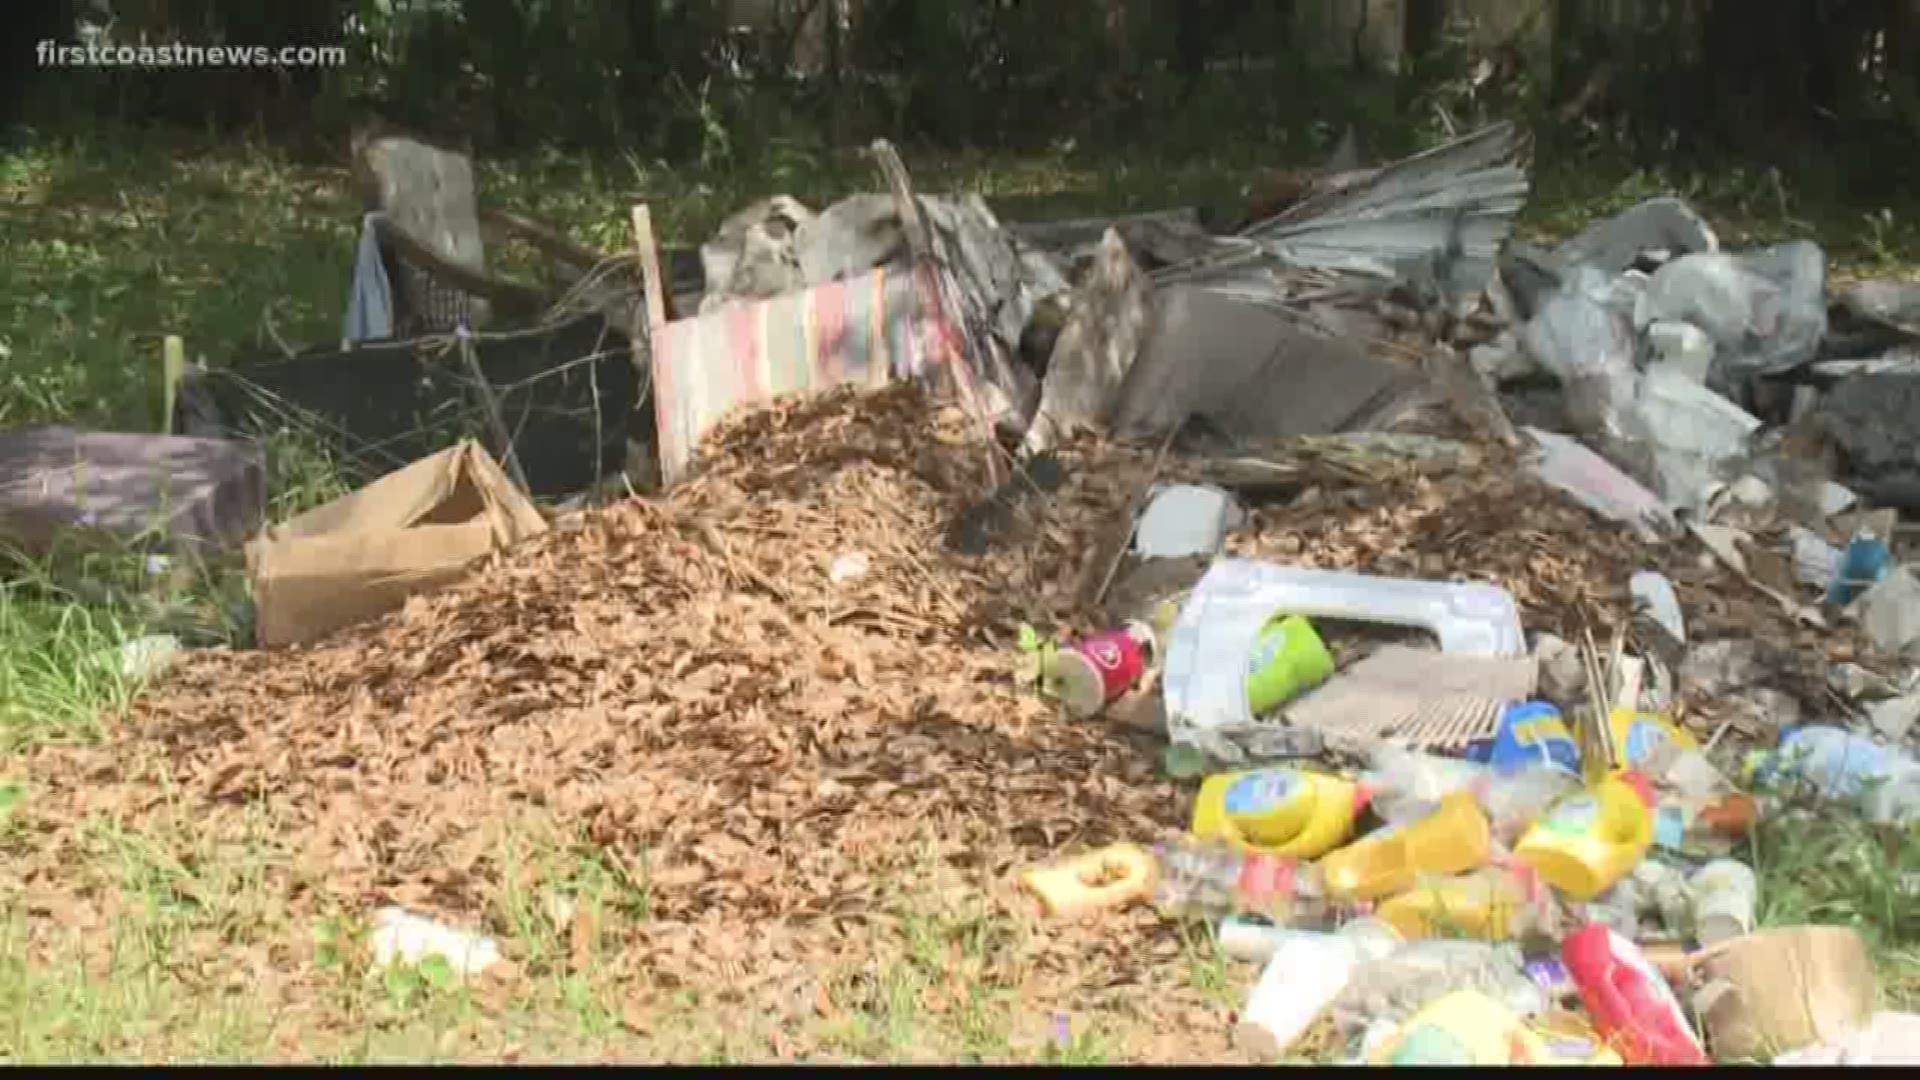 Our On Your Side team investigates after a local street is being used as a dump site.